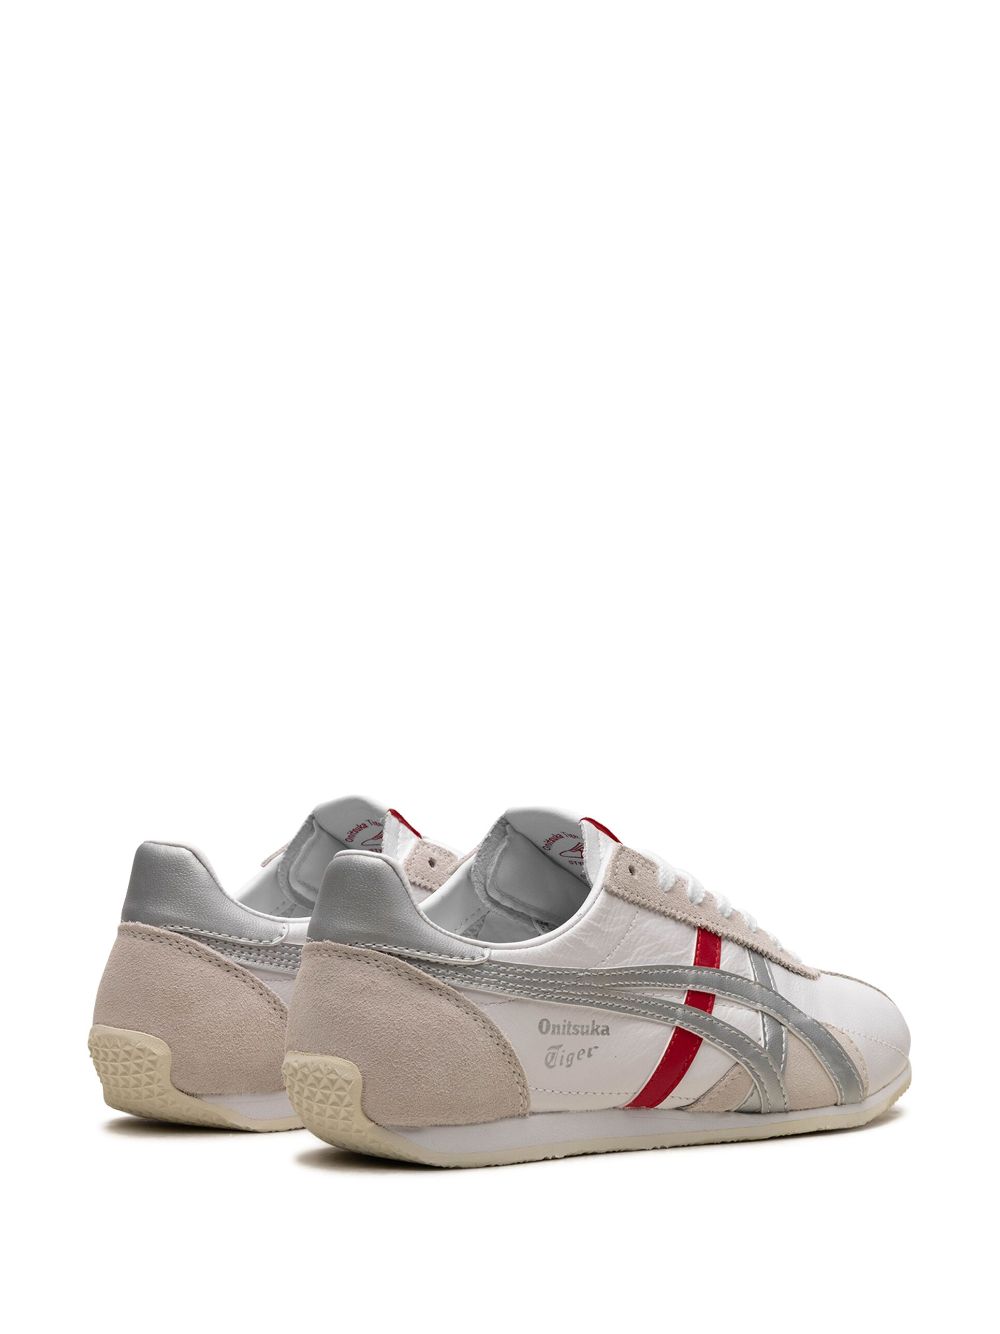 Shop Onitsuka Tiger Runspark "white/silver/red" Sneakers